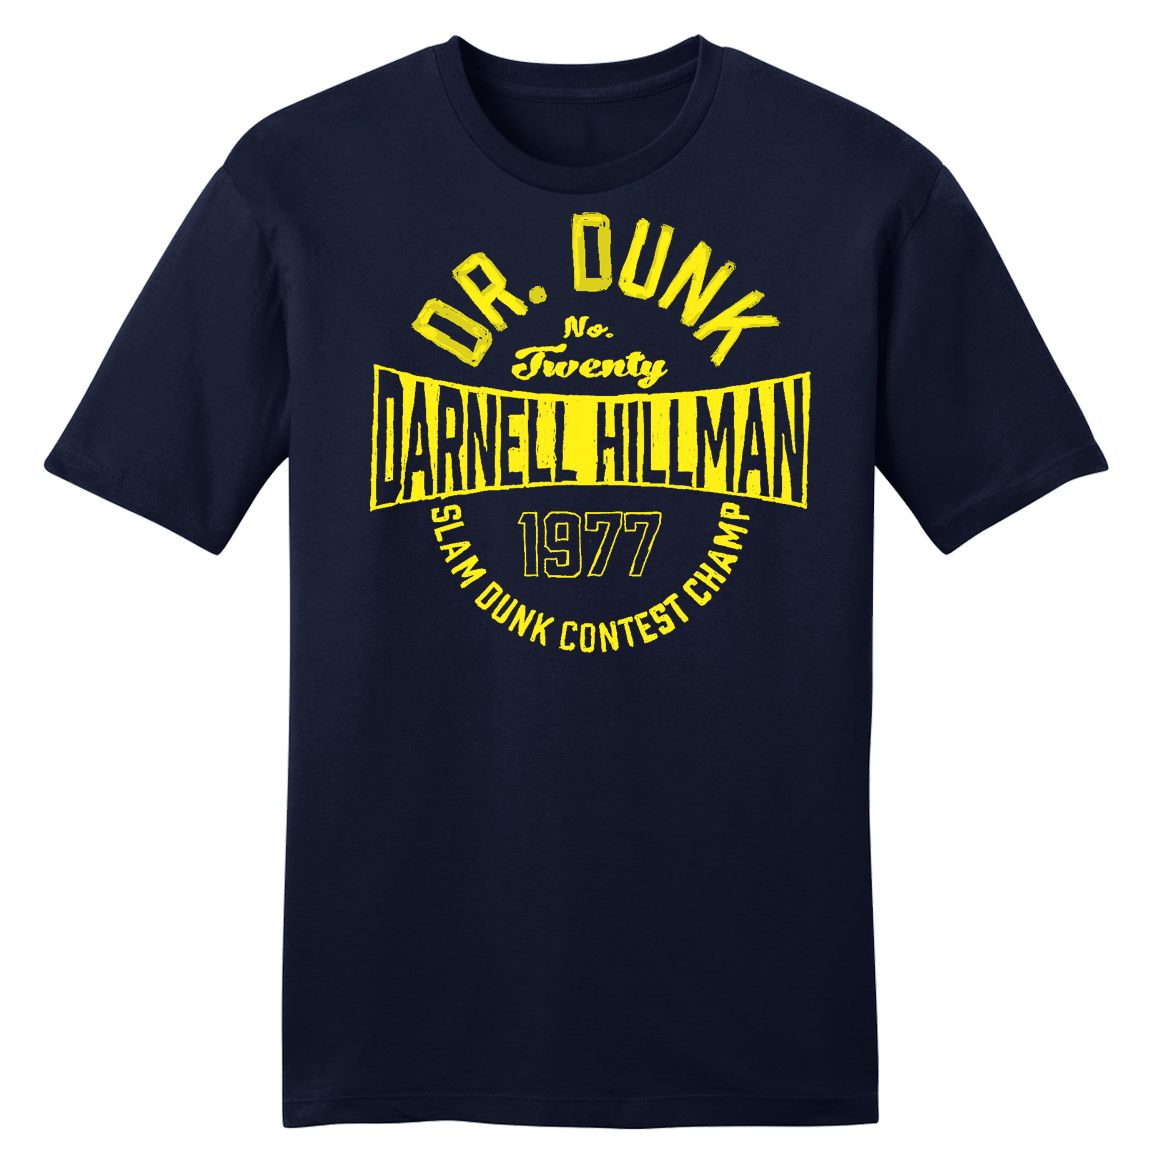 Official Darnell "Dr. Dunk" Hillman ABA Player Tee